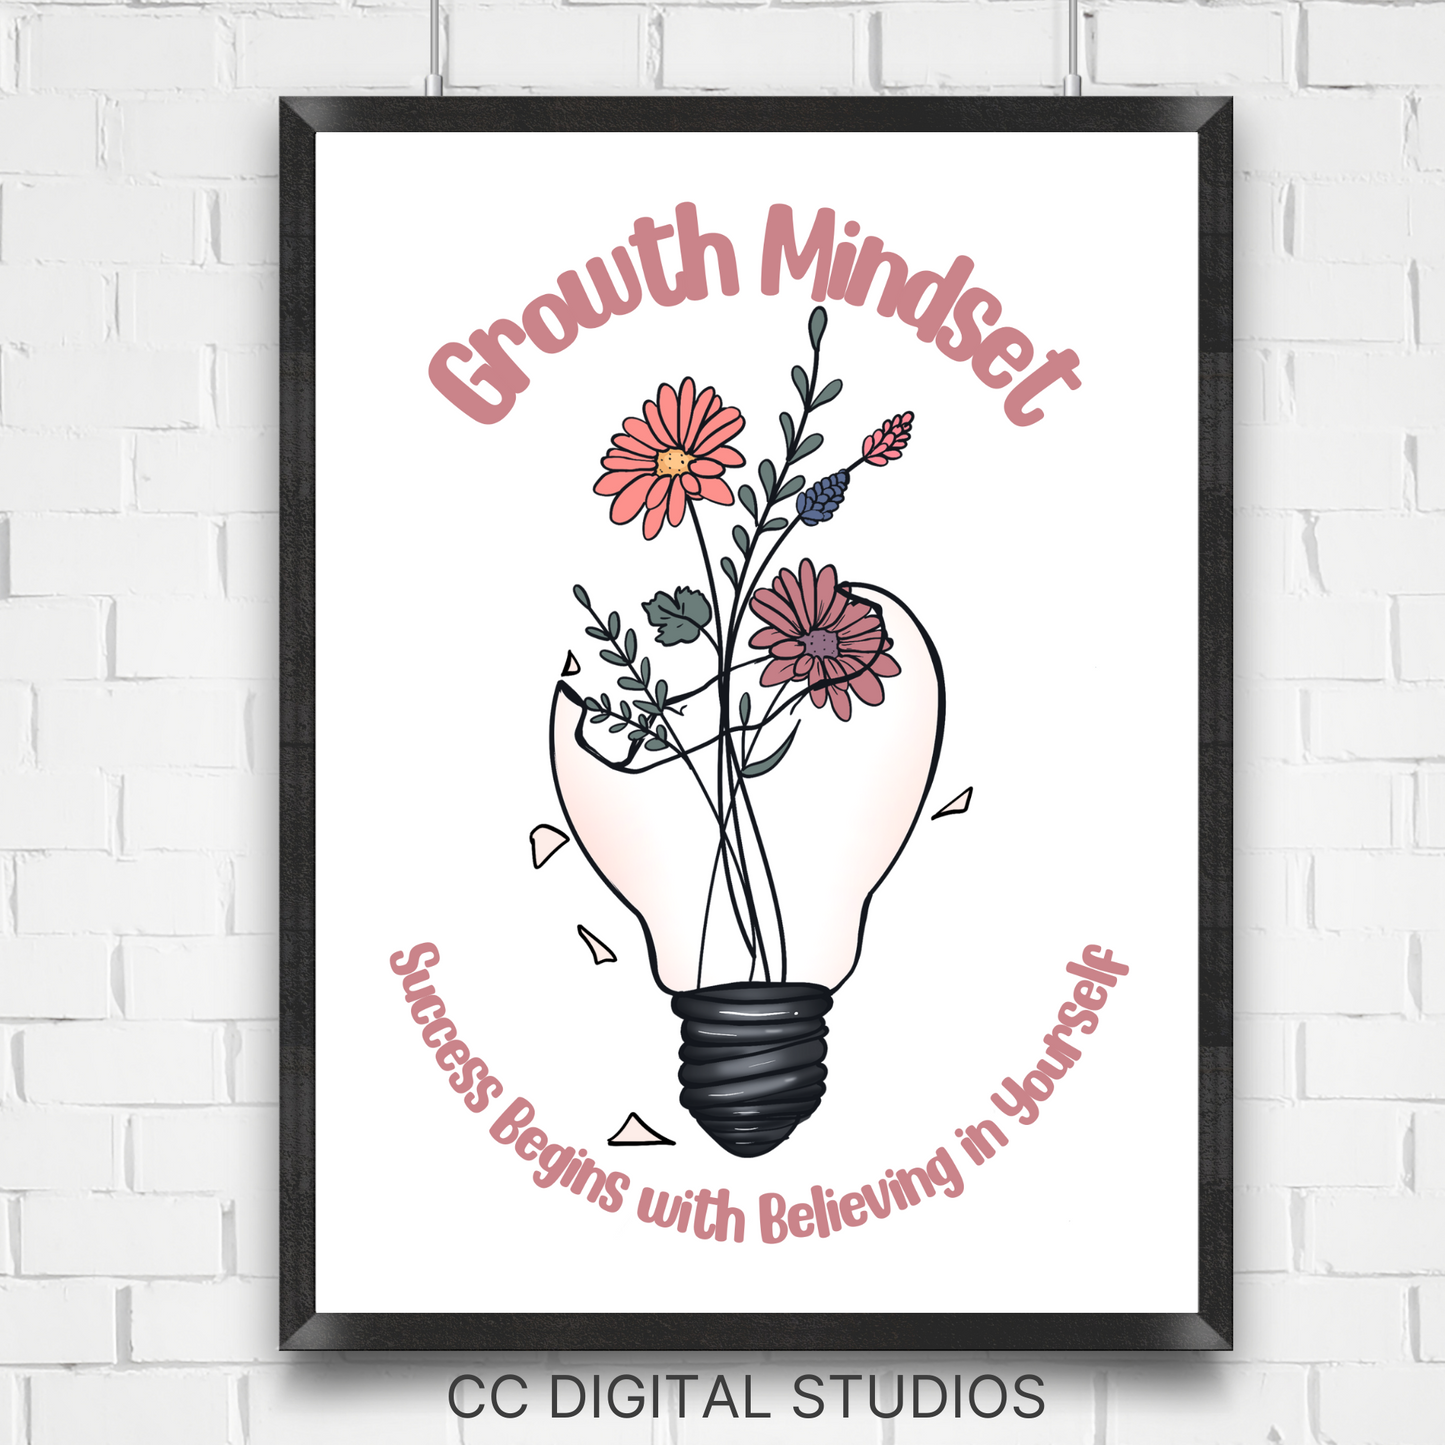 Growth mindset poster for school counselors and therapy office decor. This poster is a reminder of developing a positive mindset and having a positive outlook on life. 